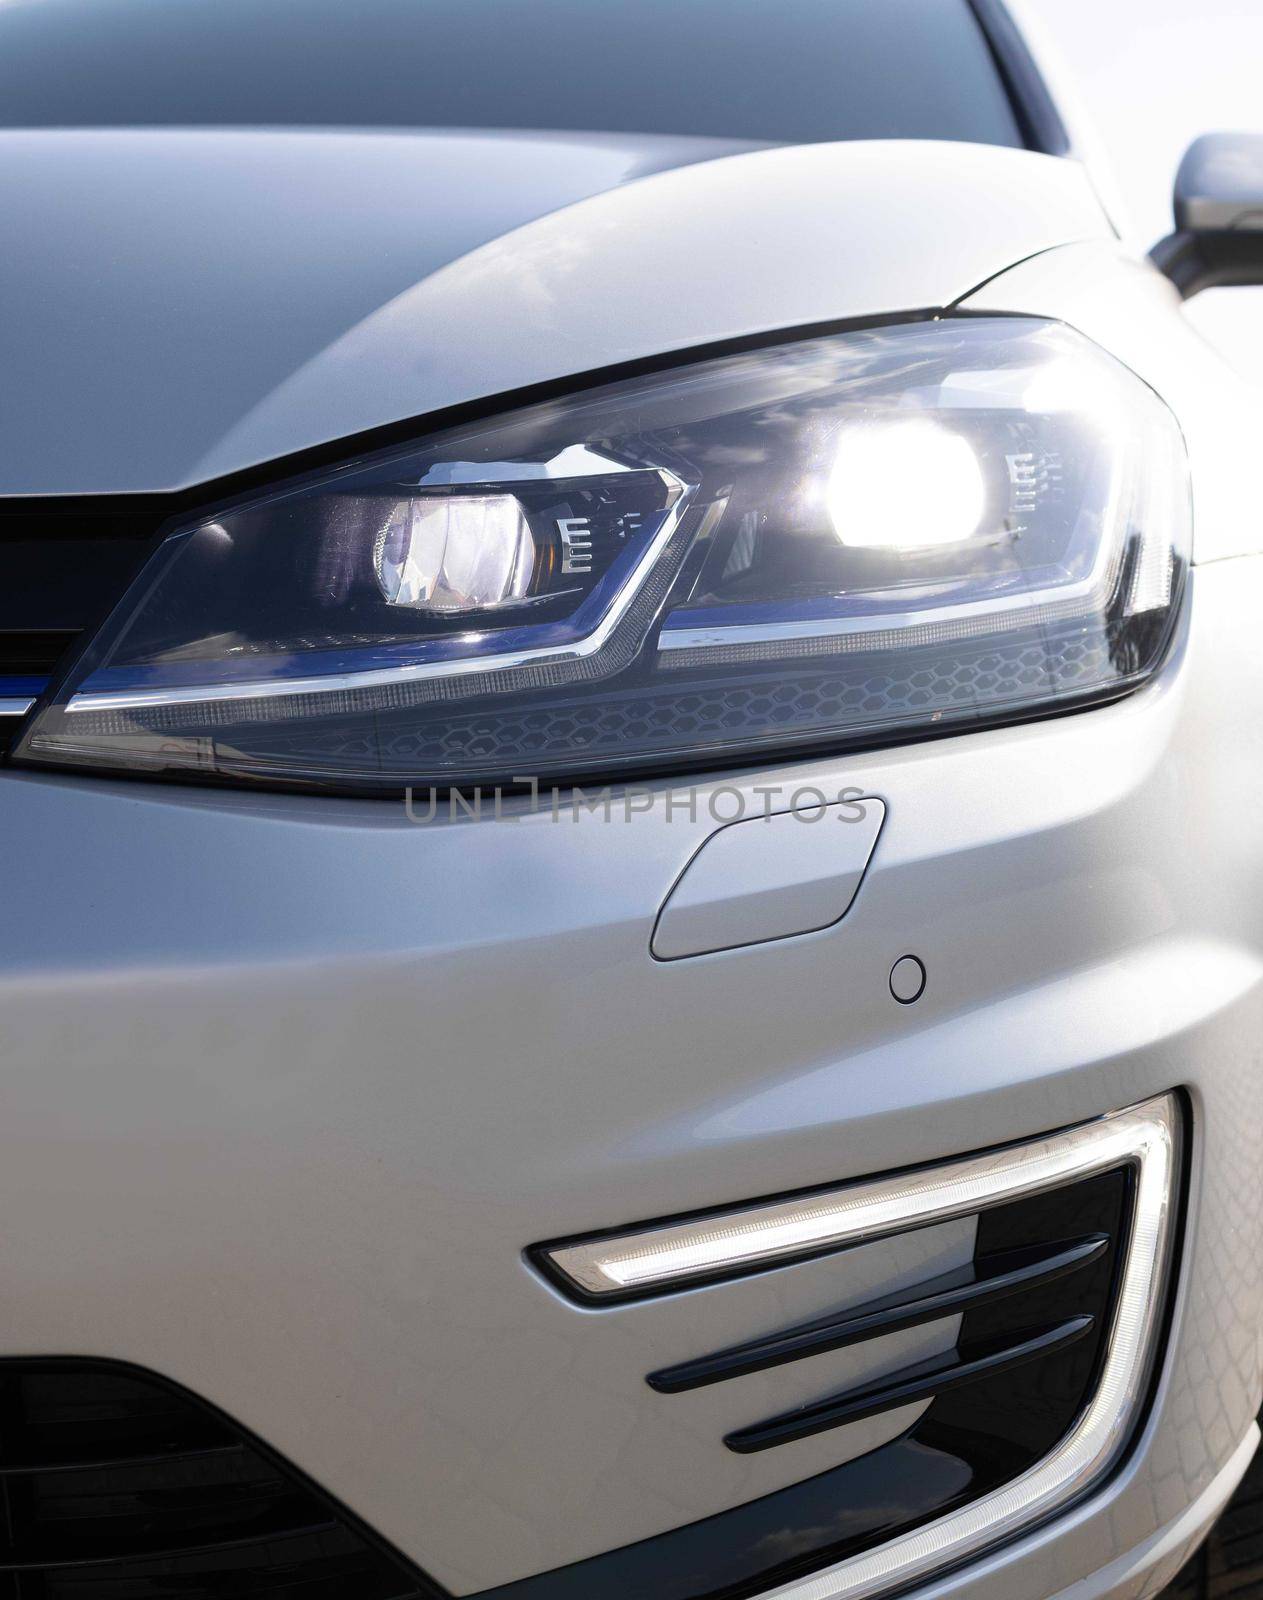 Modern car headlamp flashing light with blinking on continuously indicator. Car Front Full Led Light. Switched on led lights of luxury car. Car Blinker Light.